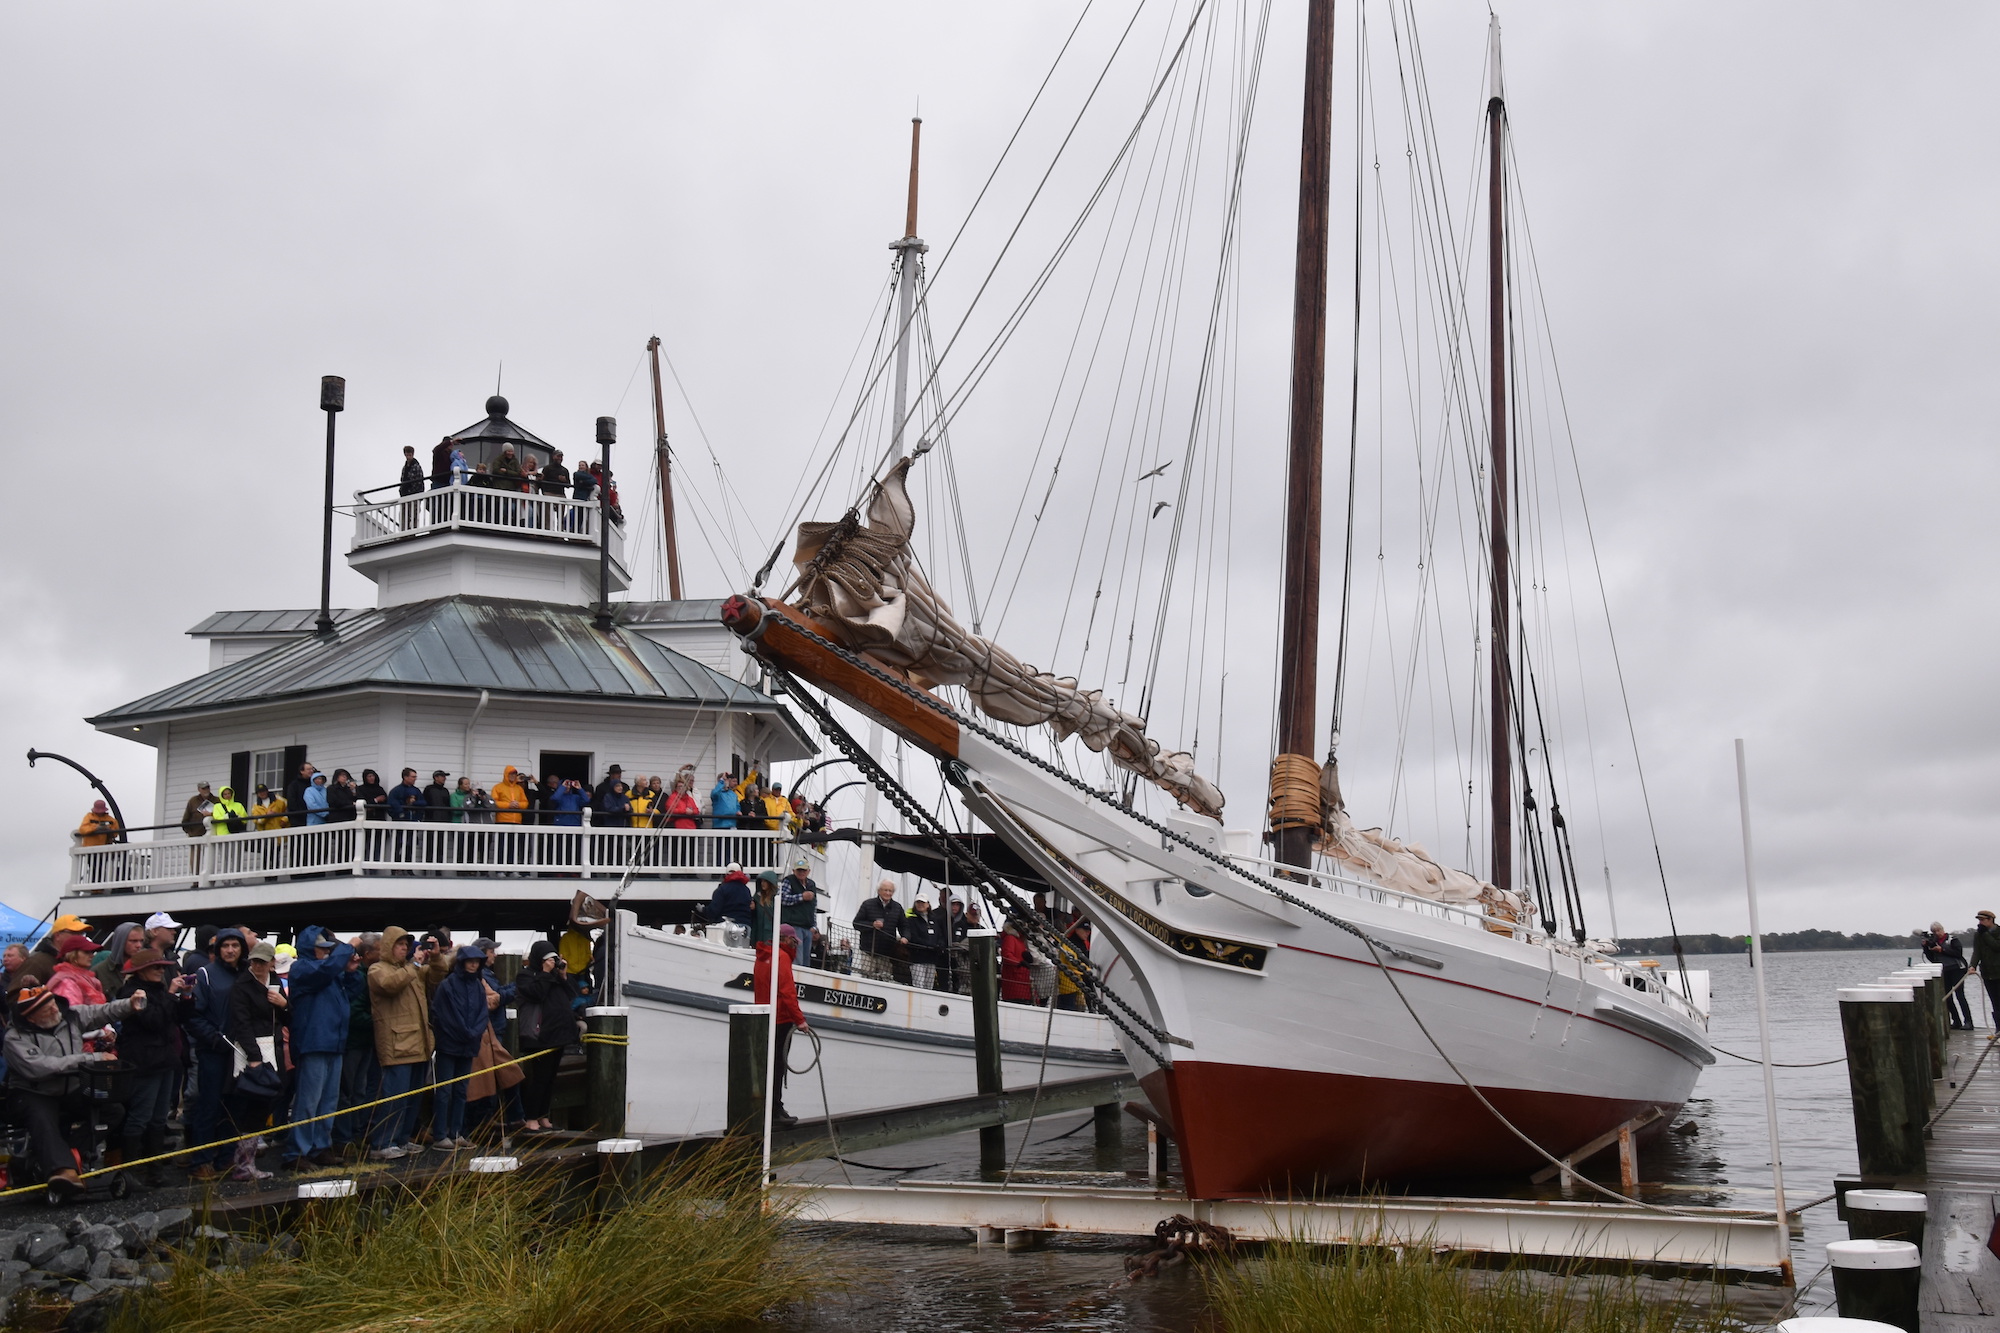   Edna Lockwood  returns to the Miles River on Saturday, Oct. 27, 2018 in front of a crowd at the Chesapeake Bay Maritime Museum.  